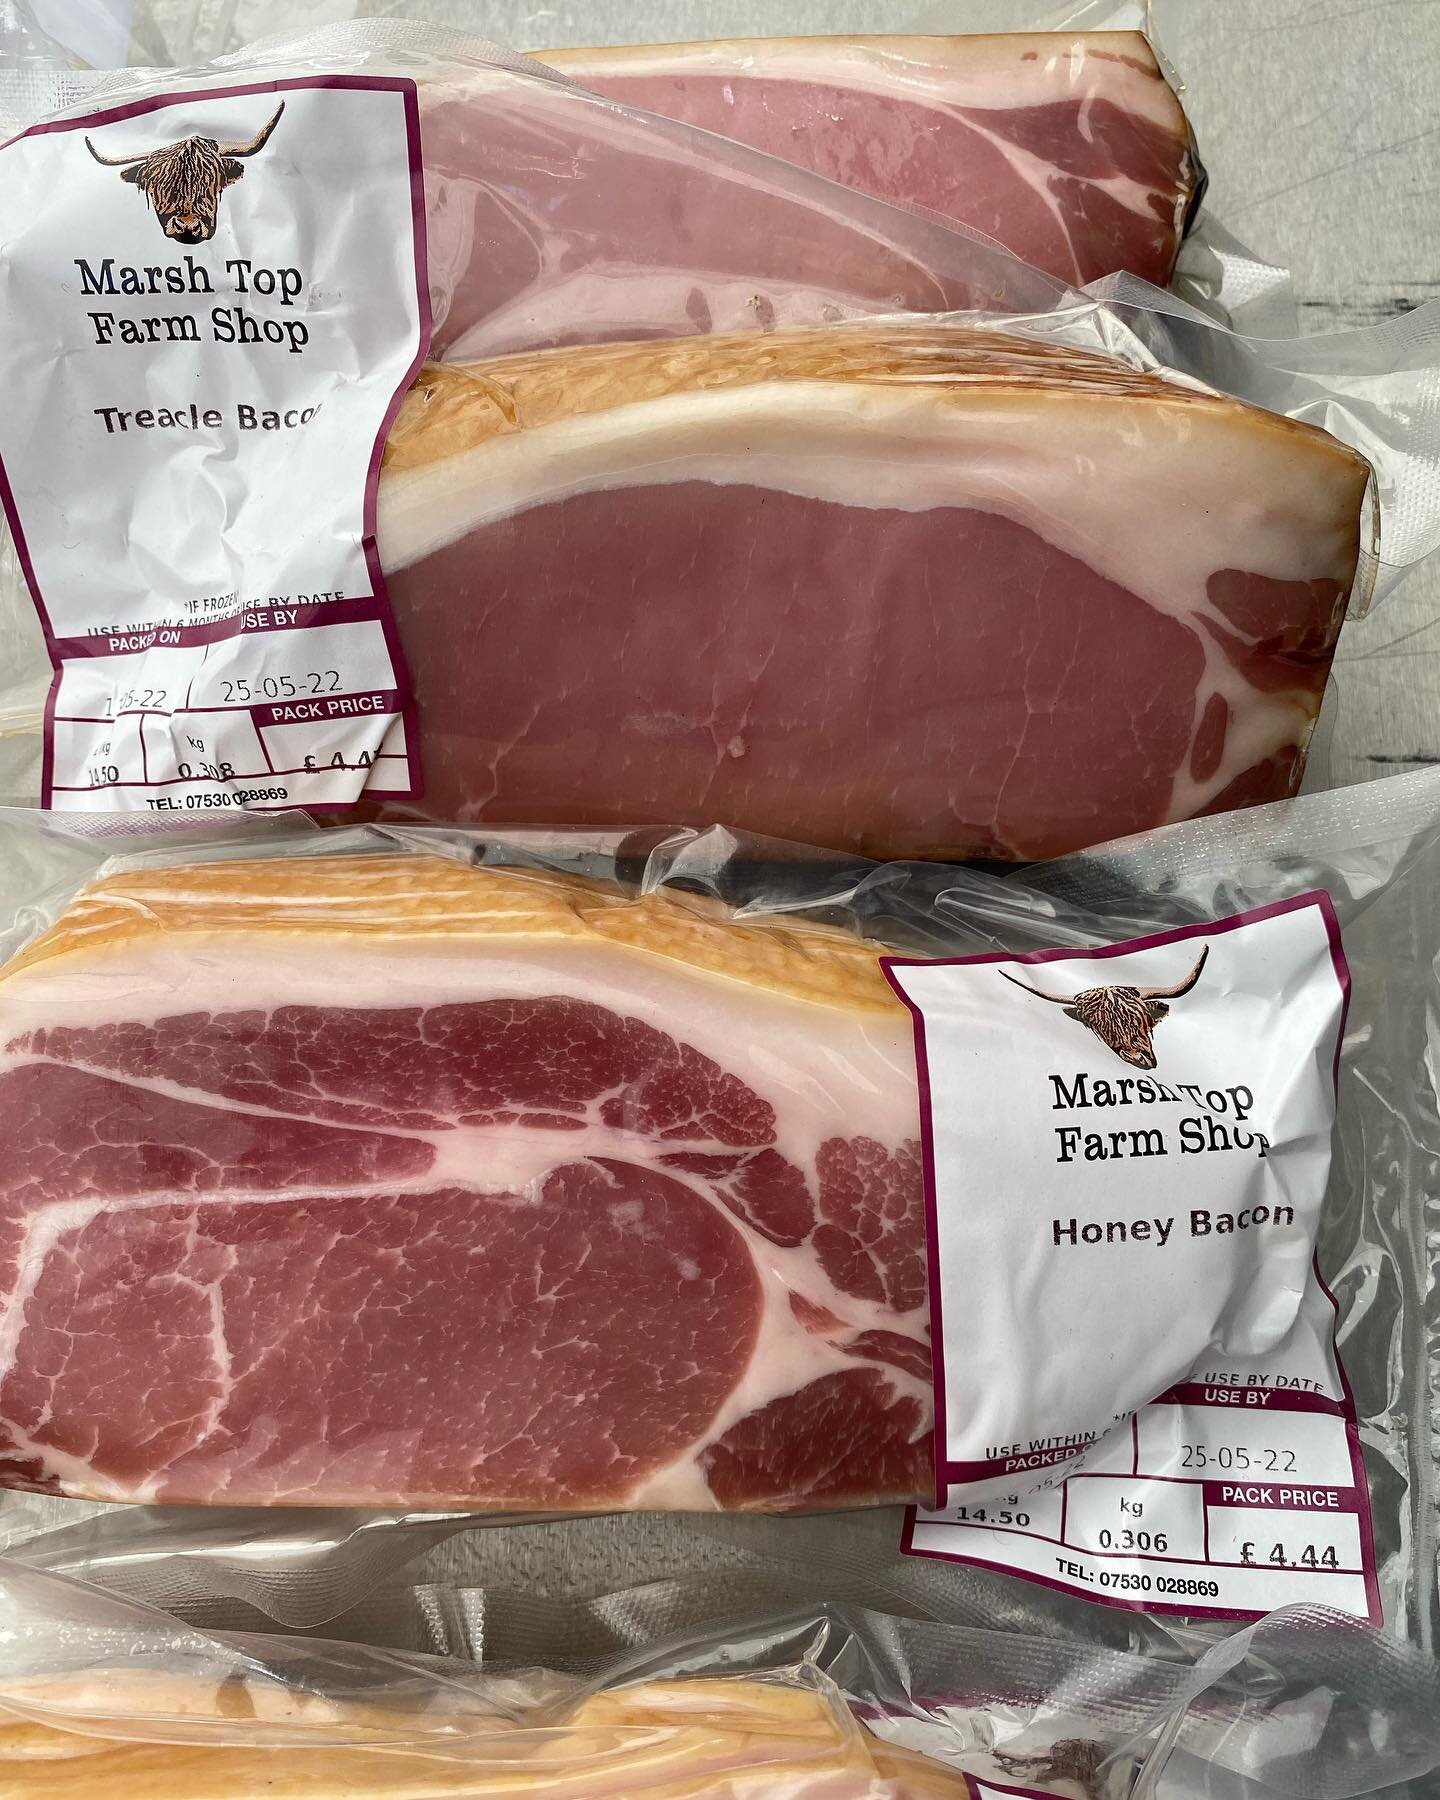 Would you go for honey bacon or treacle bacon? 

@marshtopfarmshop tells us the treacle bacon has a deeper sweeter flavour, whereas the honey is lighter and more nuanced. We might have to try both.. for research purposes of course! 

Swipe to see the